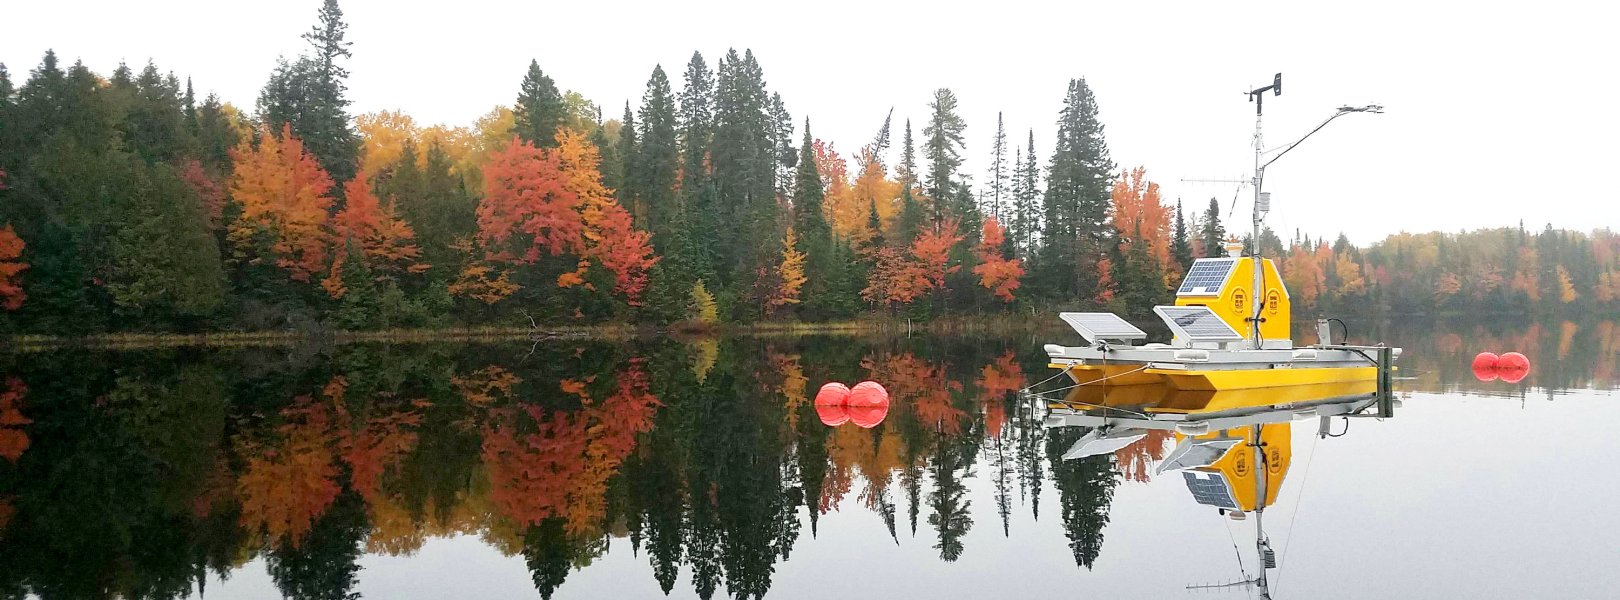 A buoy on the CRAM lake site in the fall